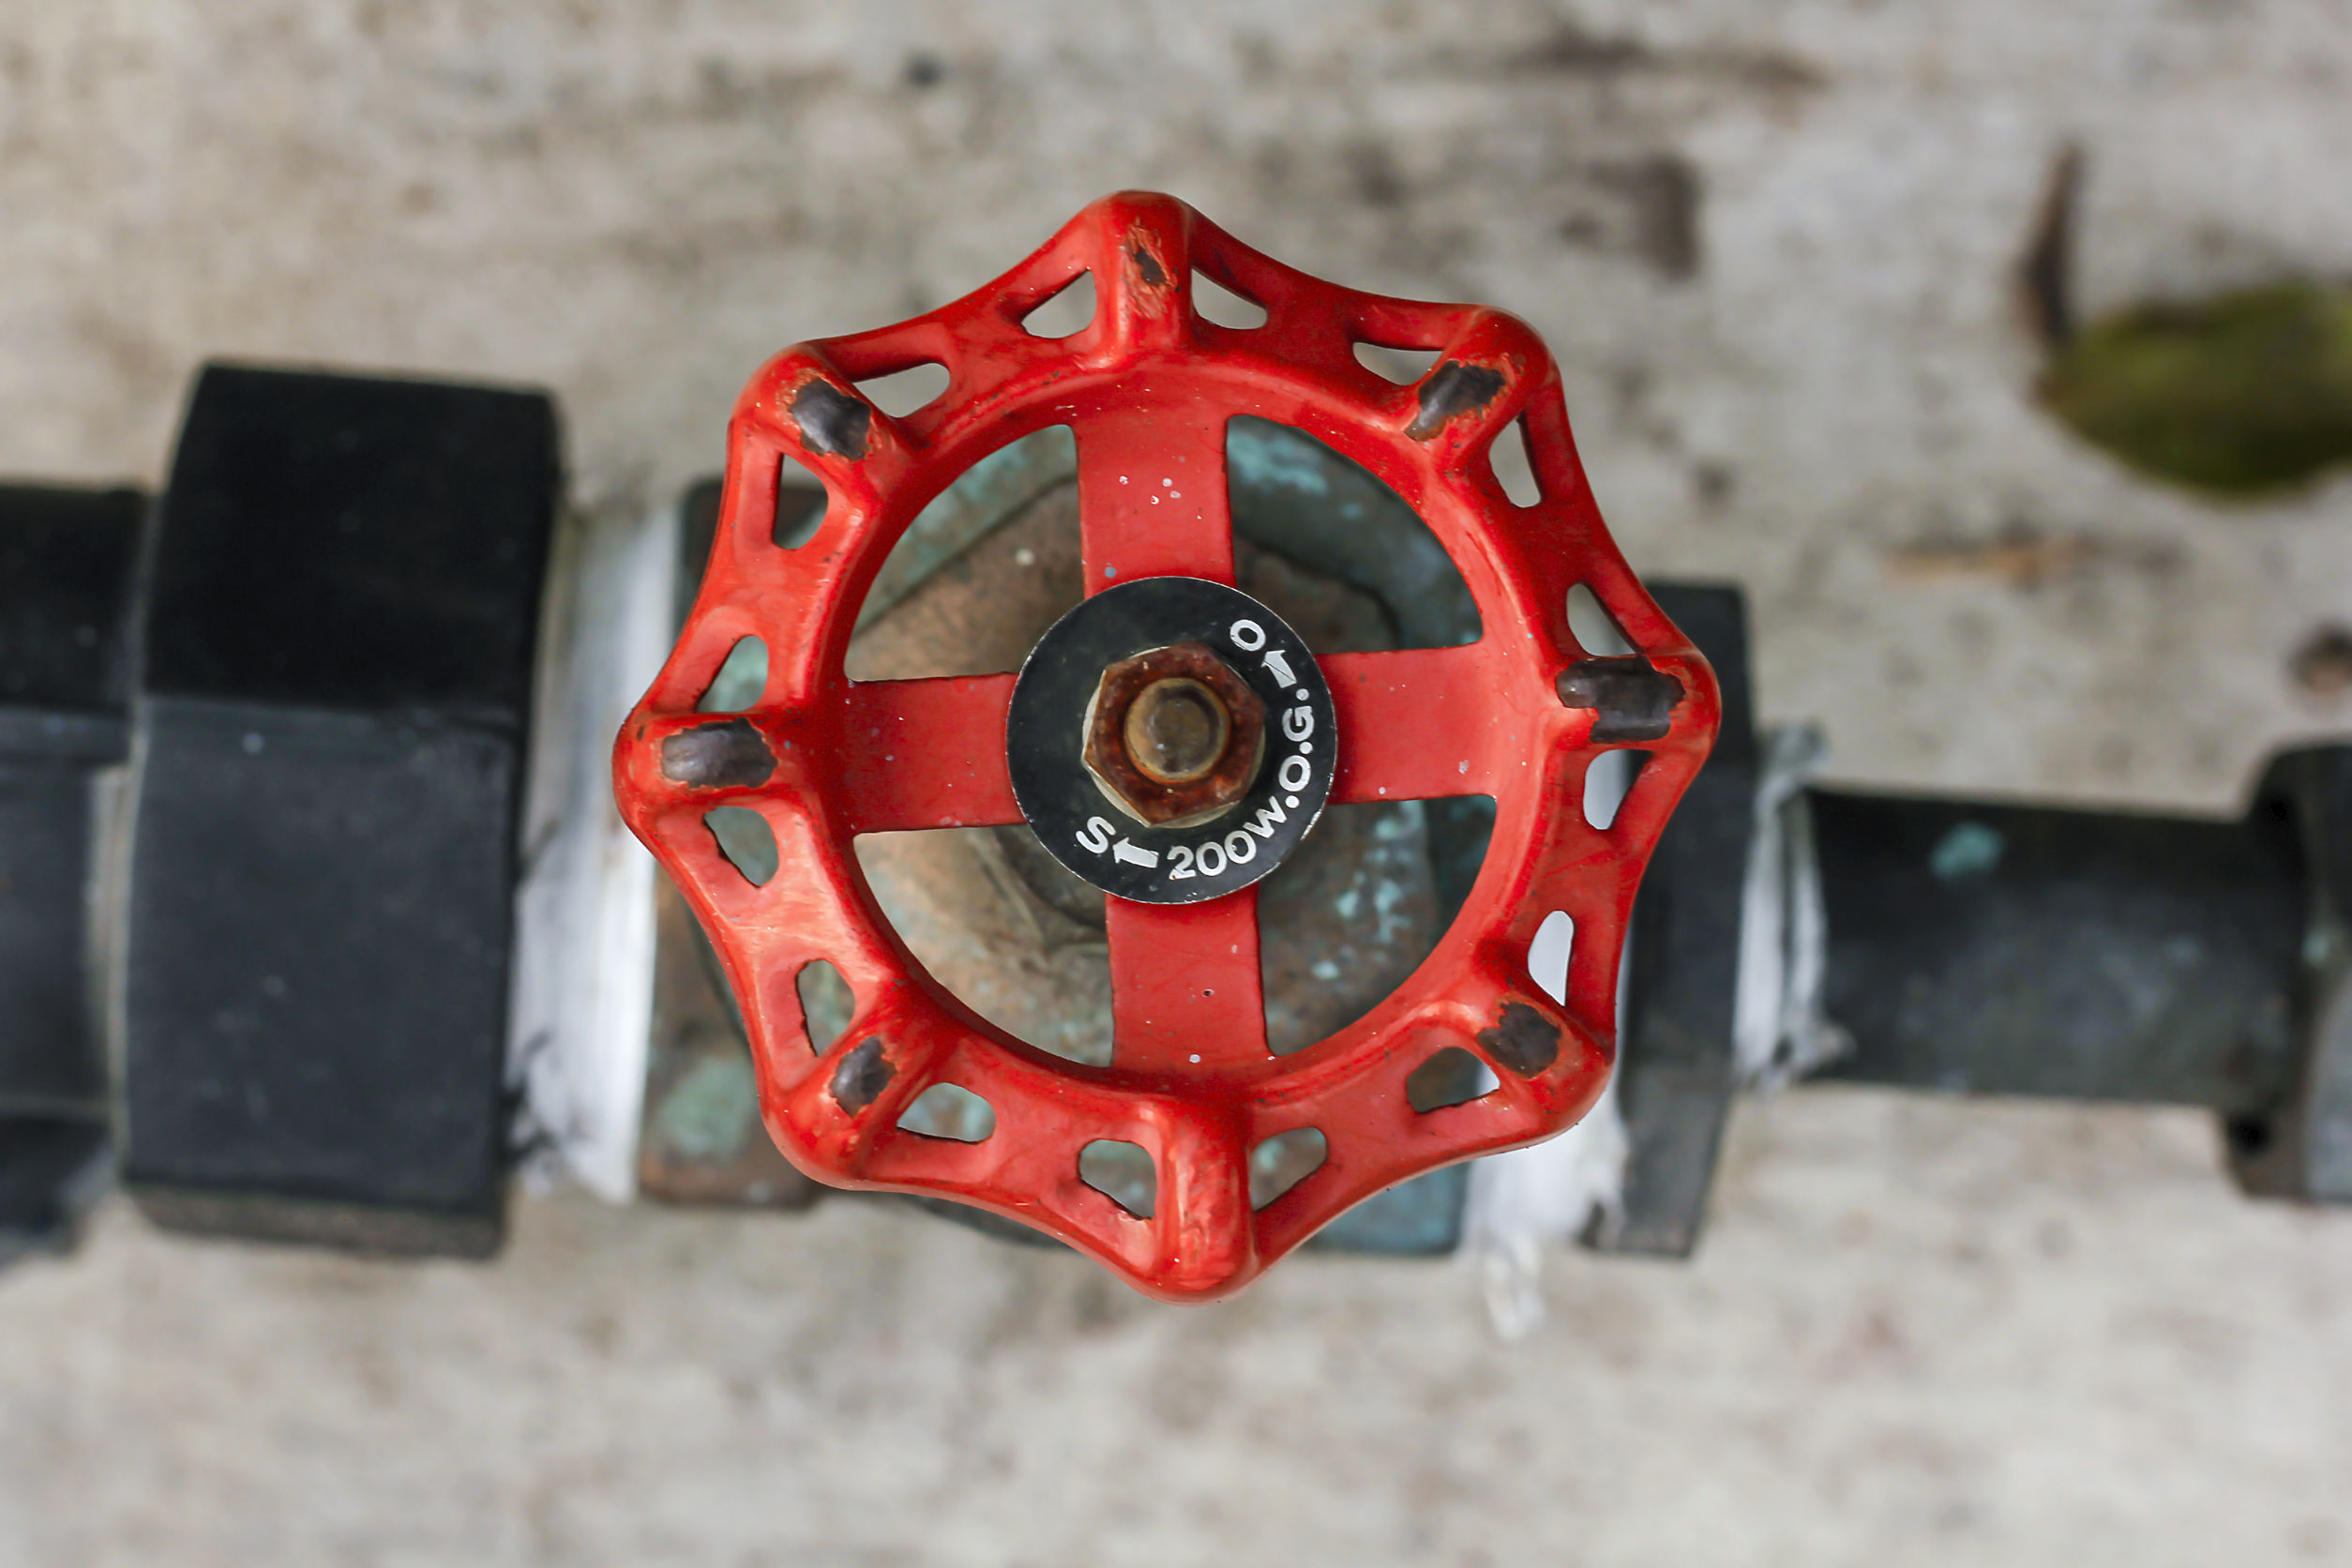 Close up of a red emergency water shutoff valve